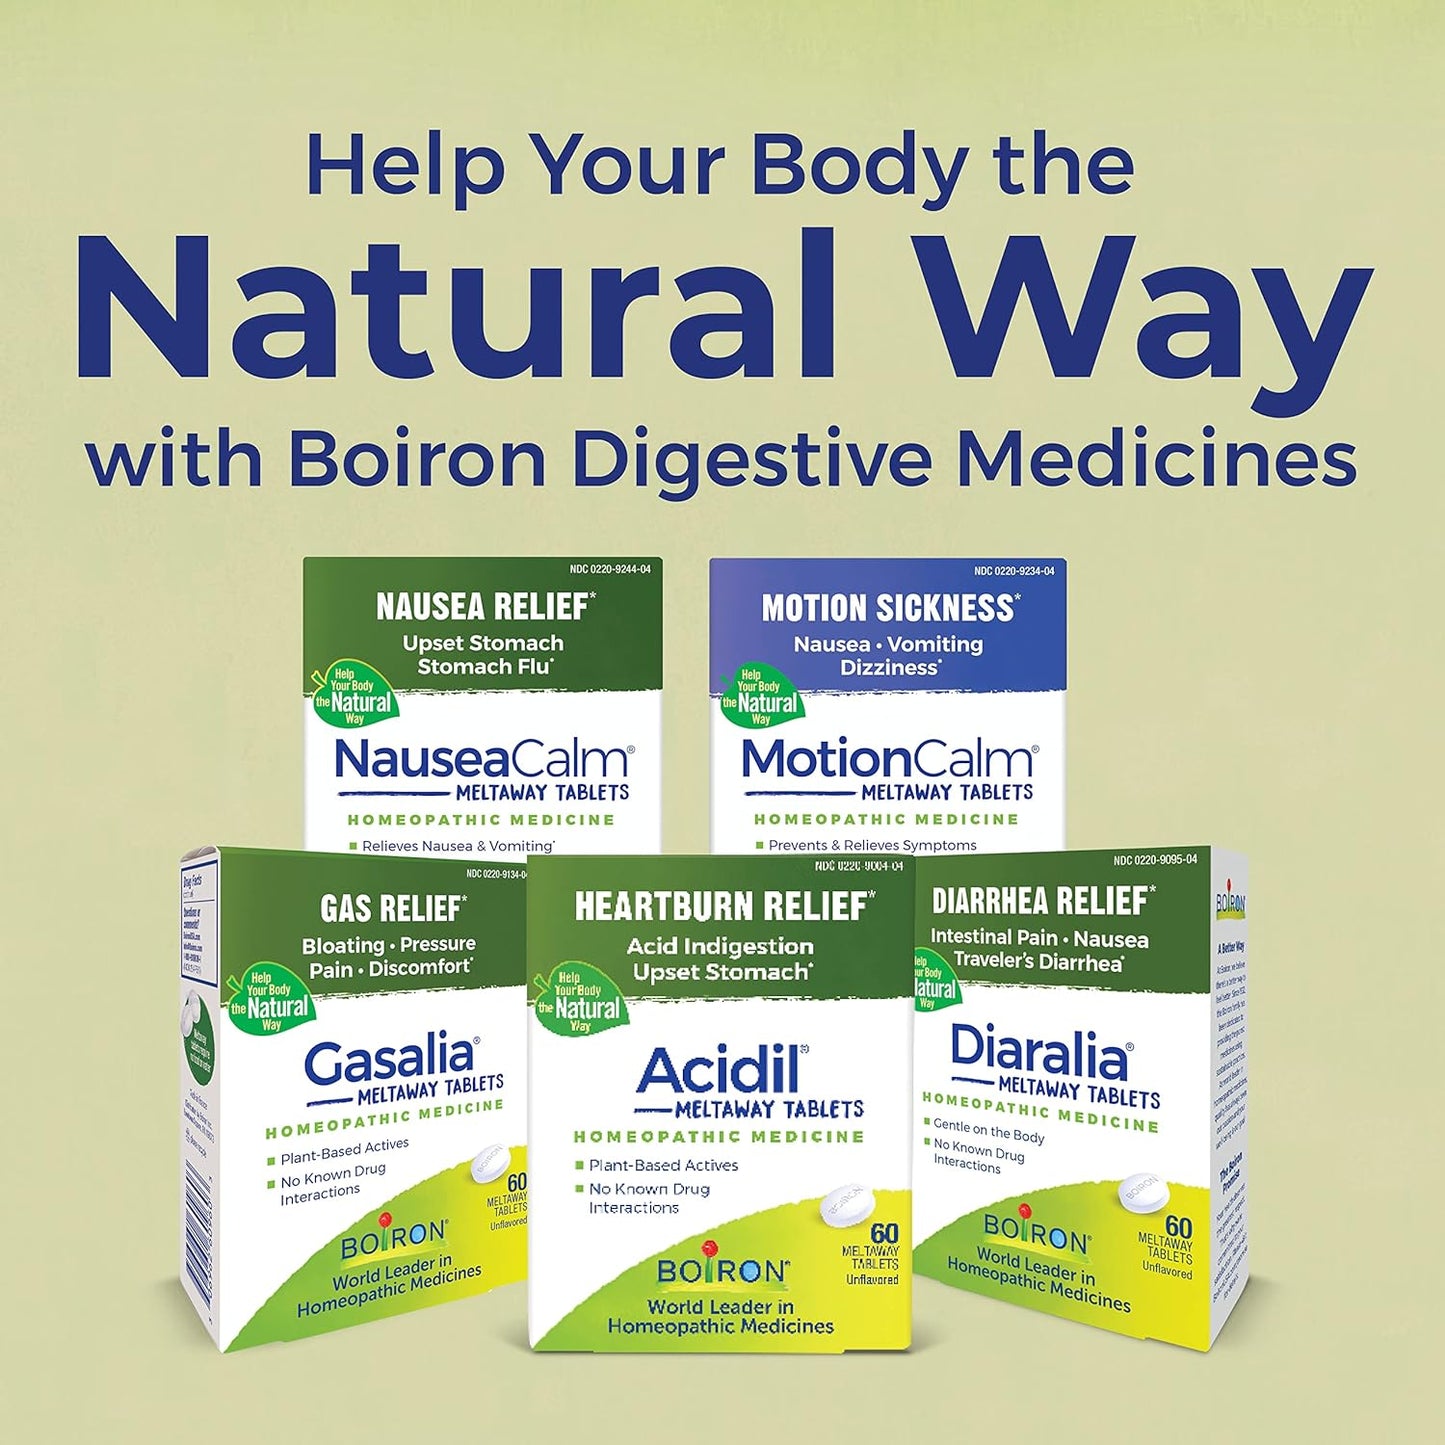 Boiron Acidil On The Go for Relief of Acid Reflux, Heartburn, Indigestion, Bloating - 2 Count (160 Pellets)